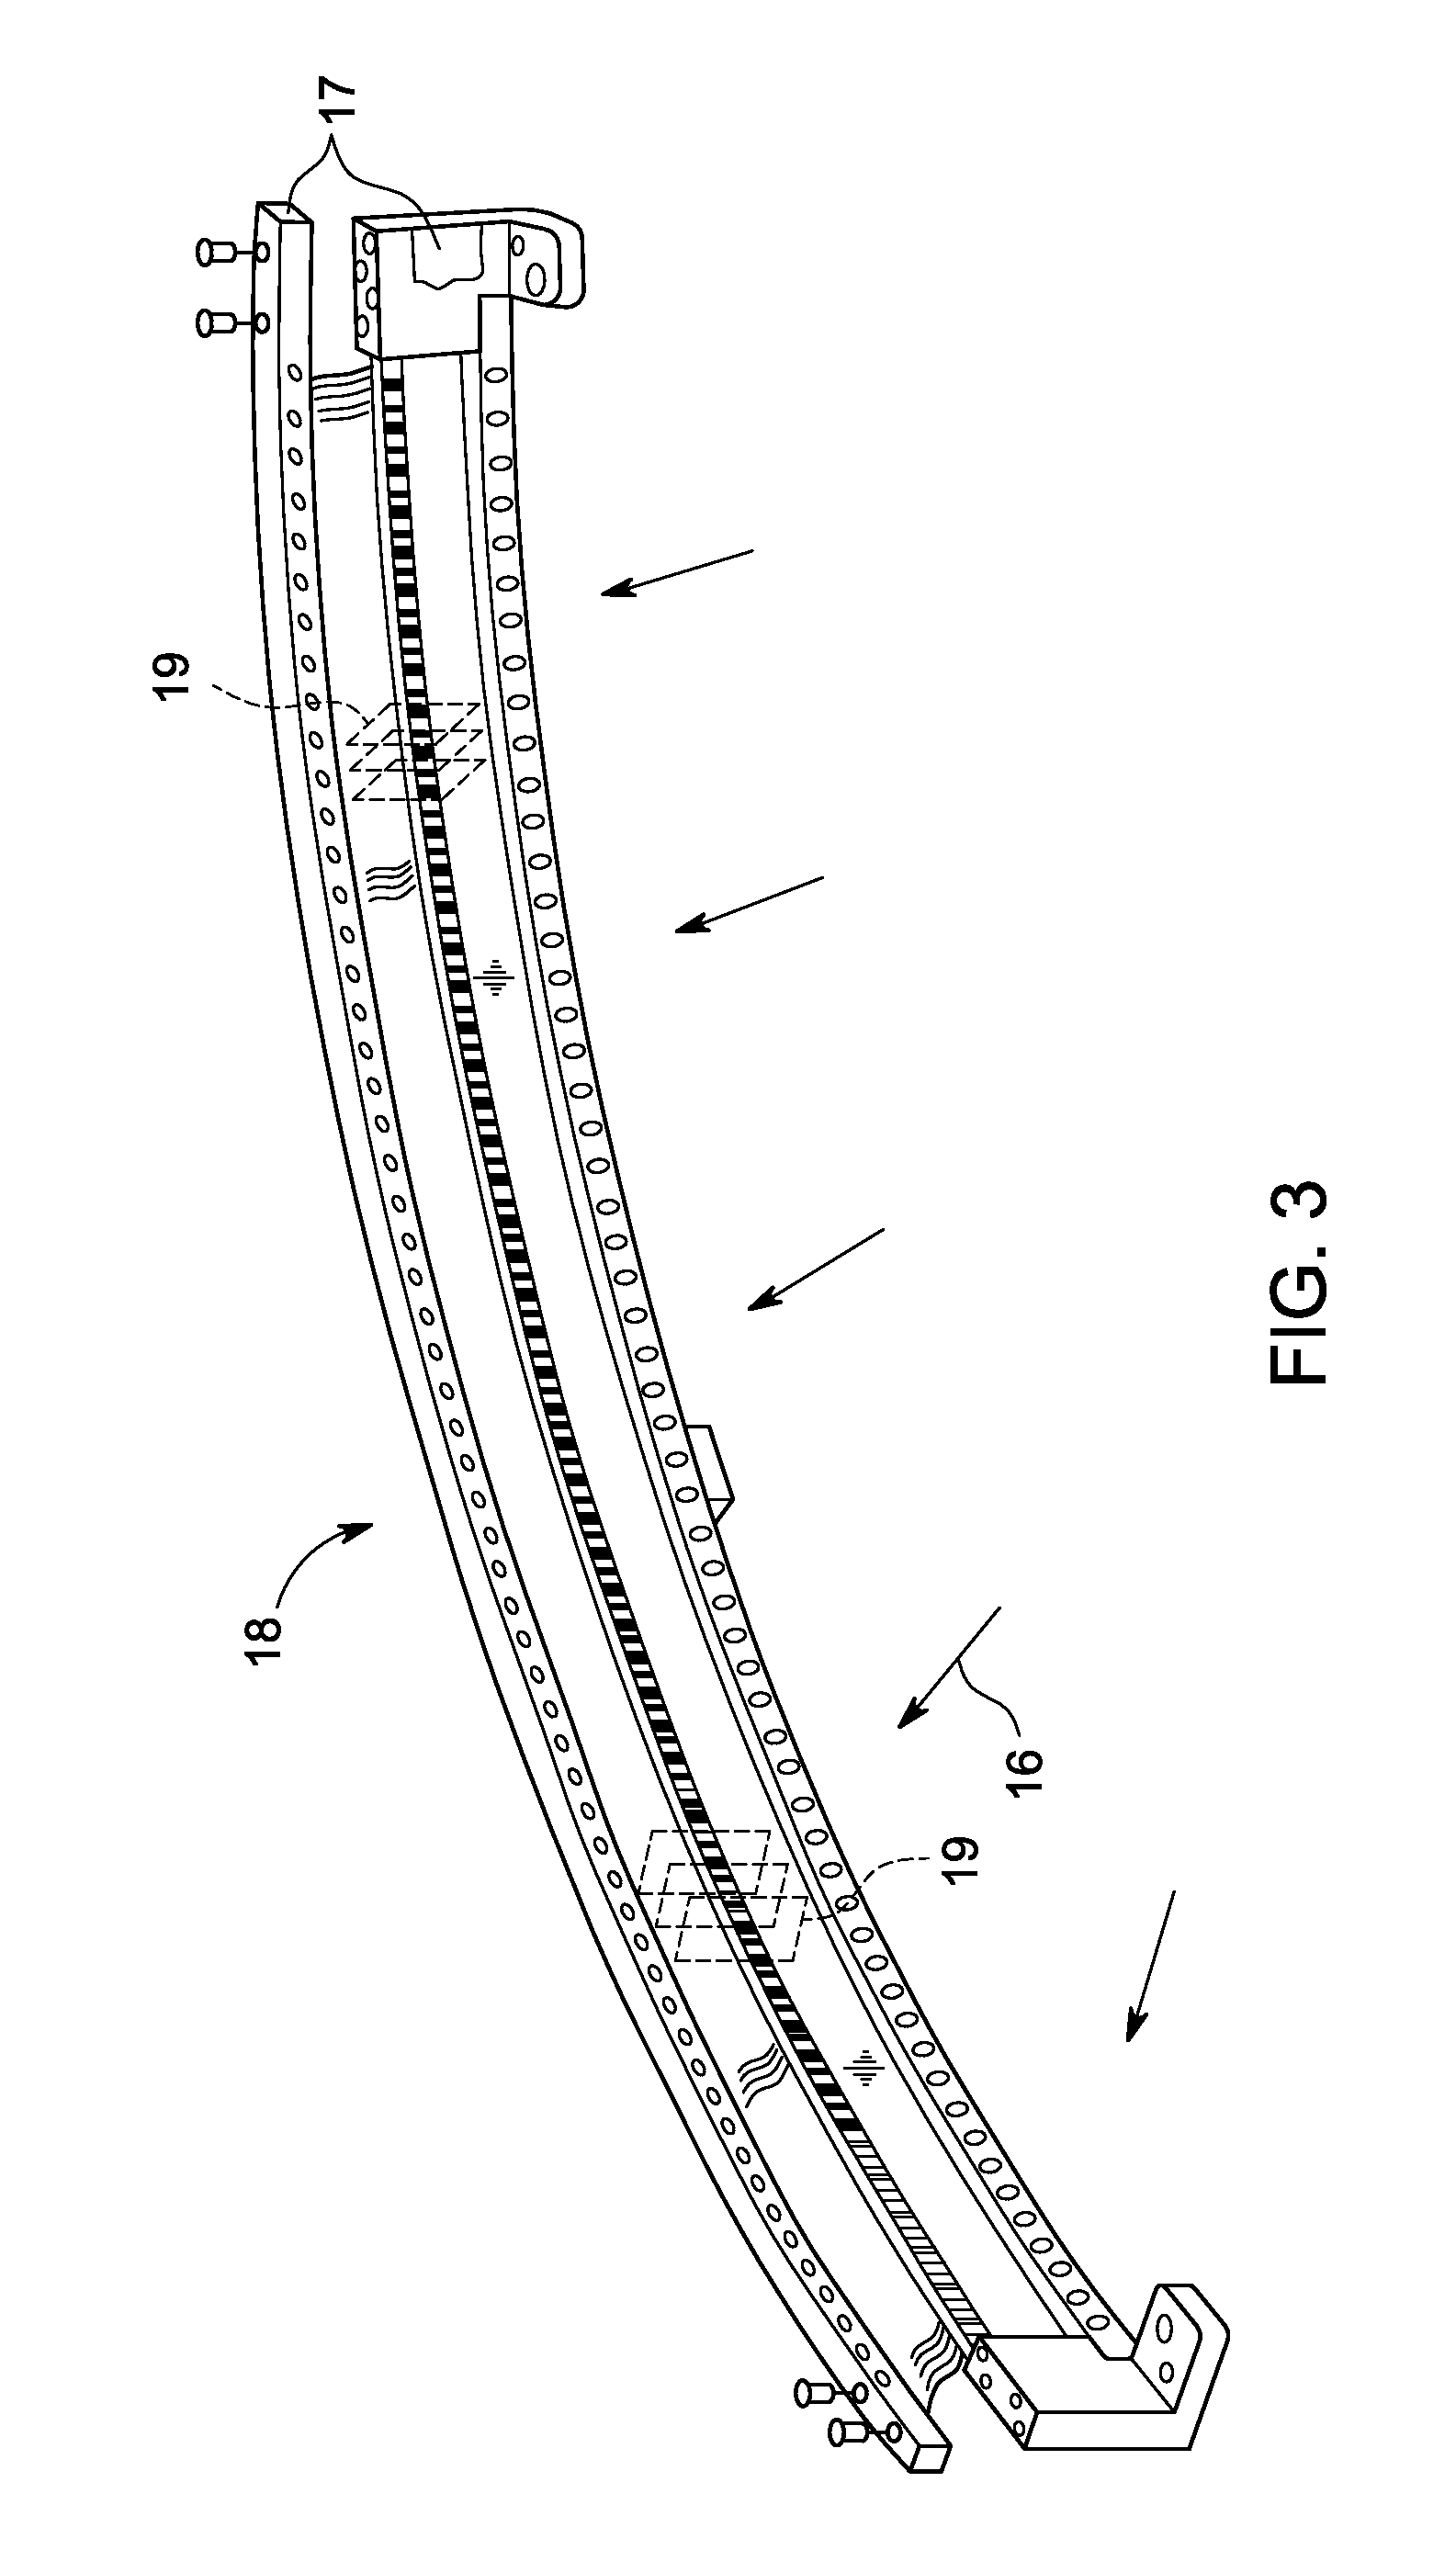 System and method for material decomposition optimization in image domain